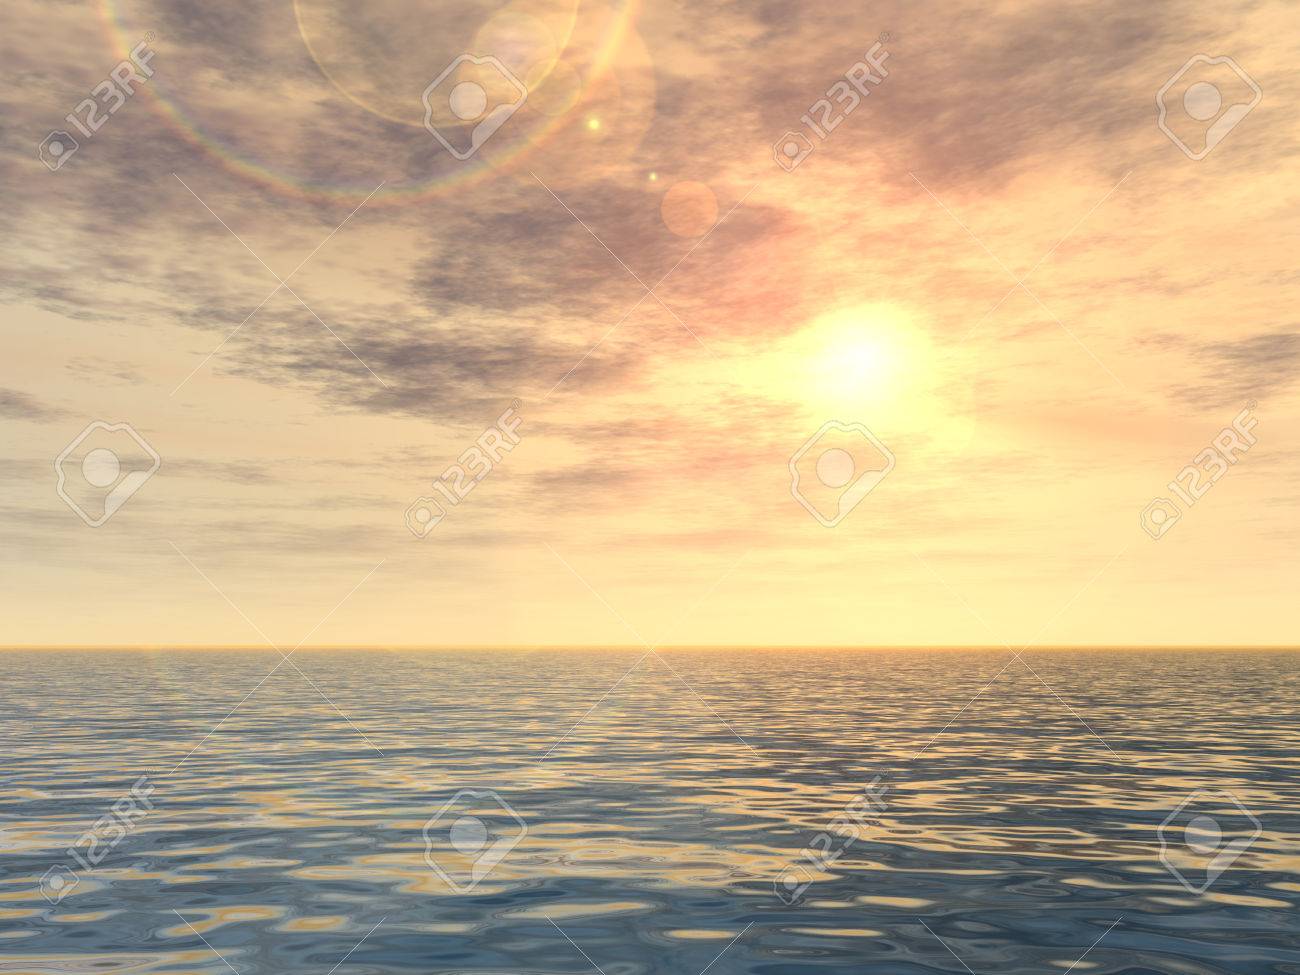 3d Conceptual Sunset Or Sunrise Background With The Sun Close